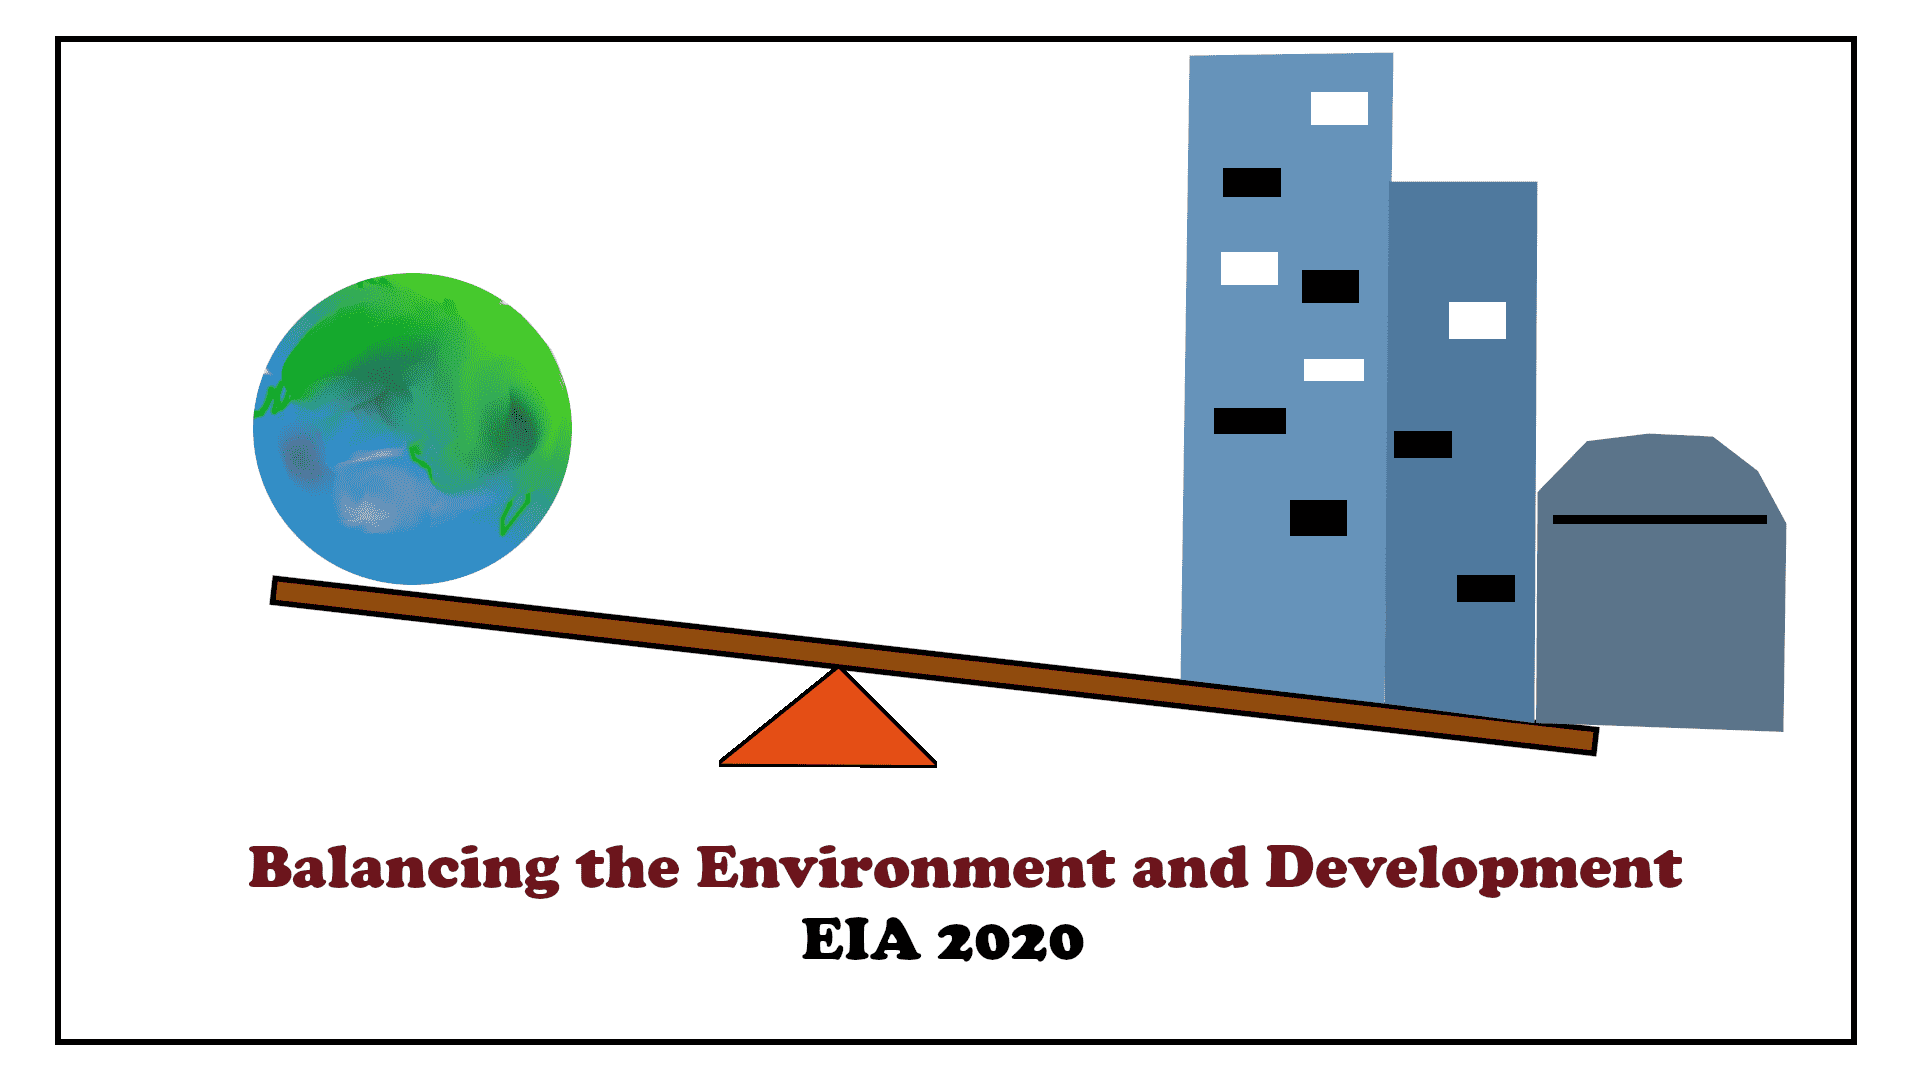 EIA 2020 Impact consequences and overview